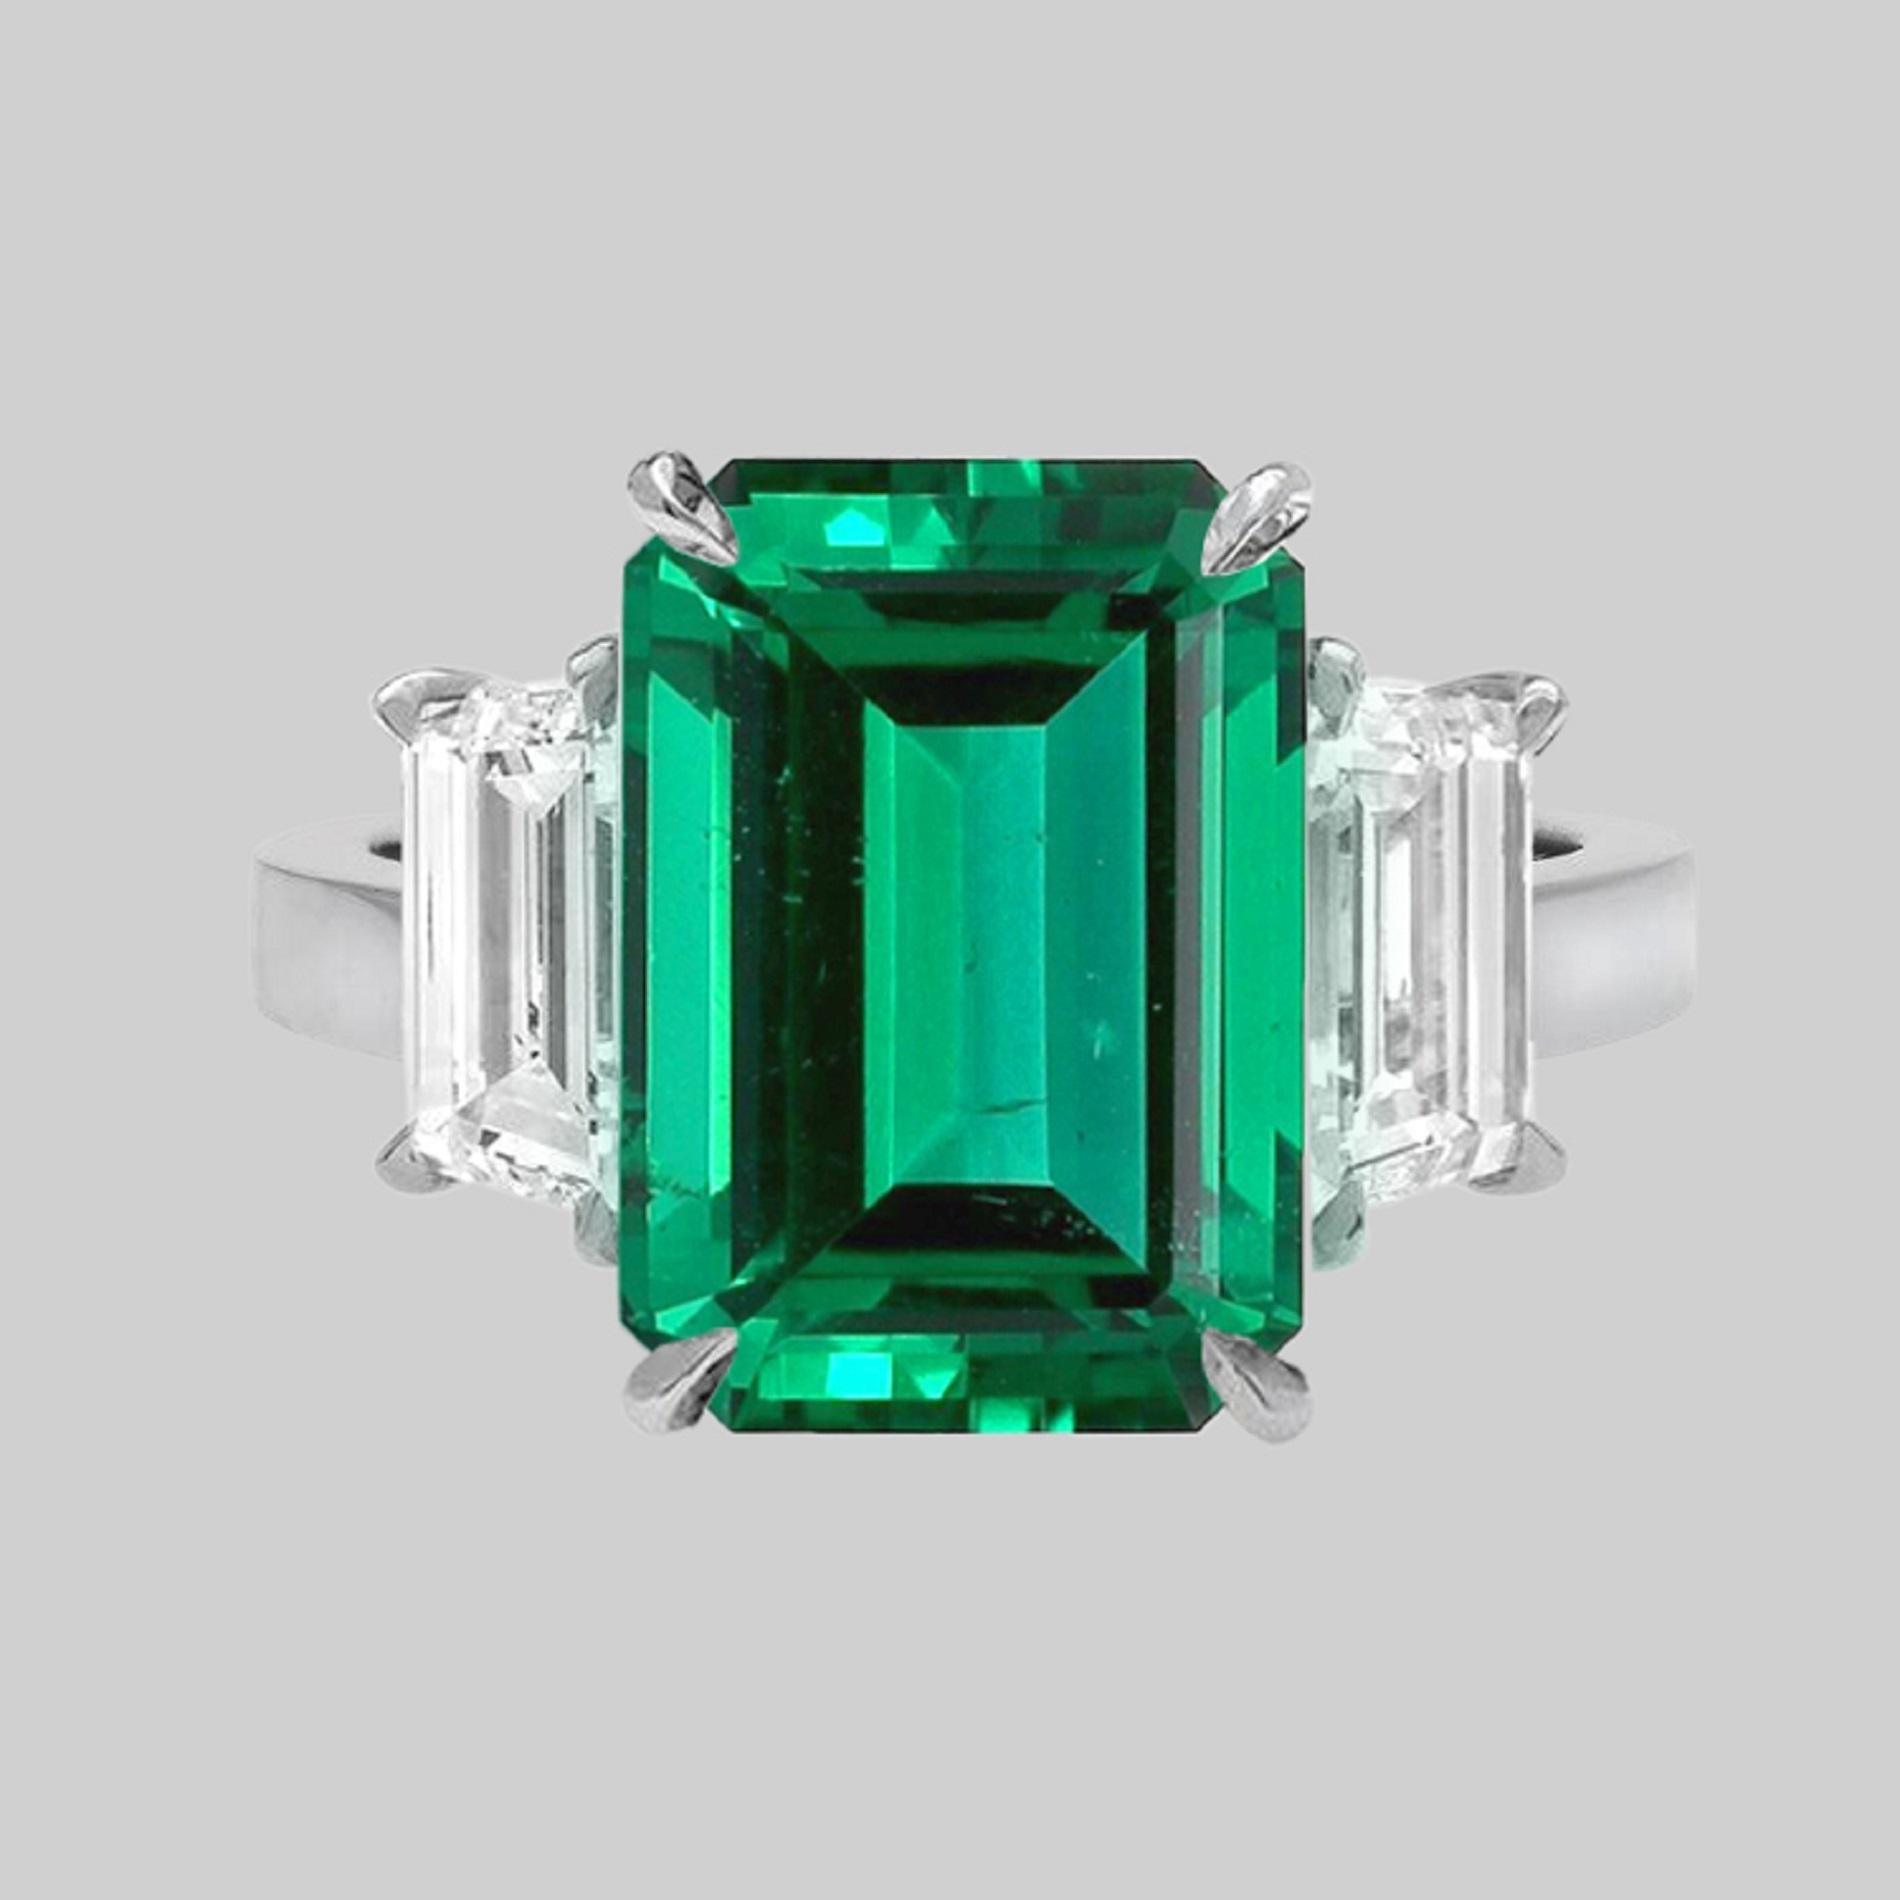 An exquisite 4 carat green emeald with practically no inclusions and a vivid green color!
The side 

EXQUISITE EMERALD AND DIAMOND RING This marvelous 3 stone styled ring sports a Rare  Emerald weighing 4 cts. The real eye catcher of this beautiful